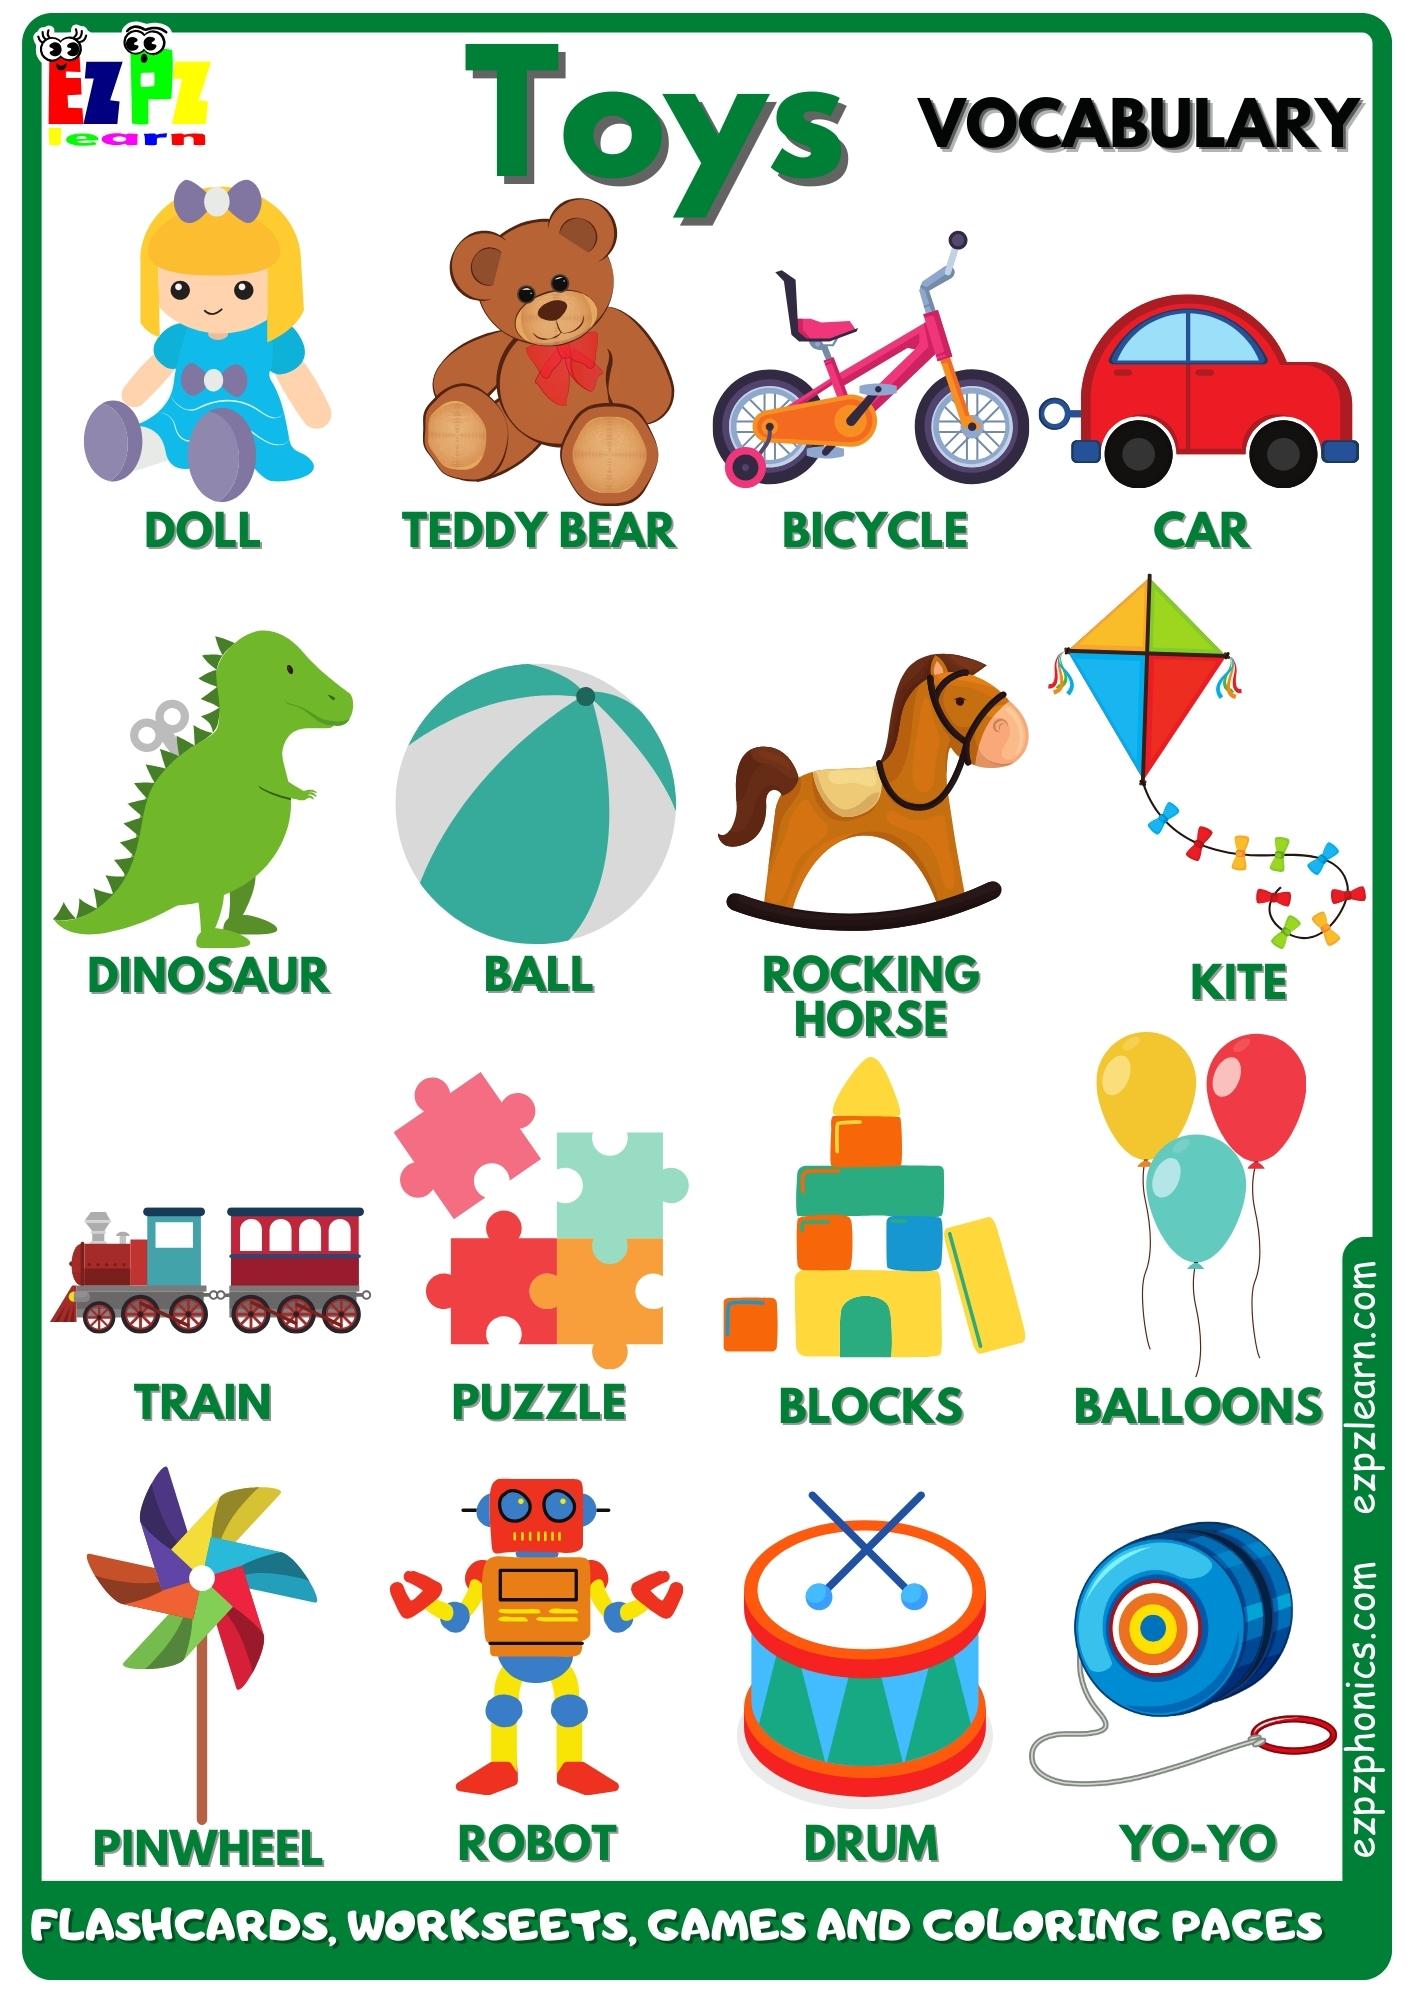 Toys Vocabulary Free English Vocabulary Flashcards, Worksheets, Coloring  Pages, Games and More for Homeschool and English Language Learners 